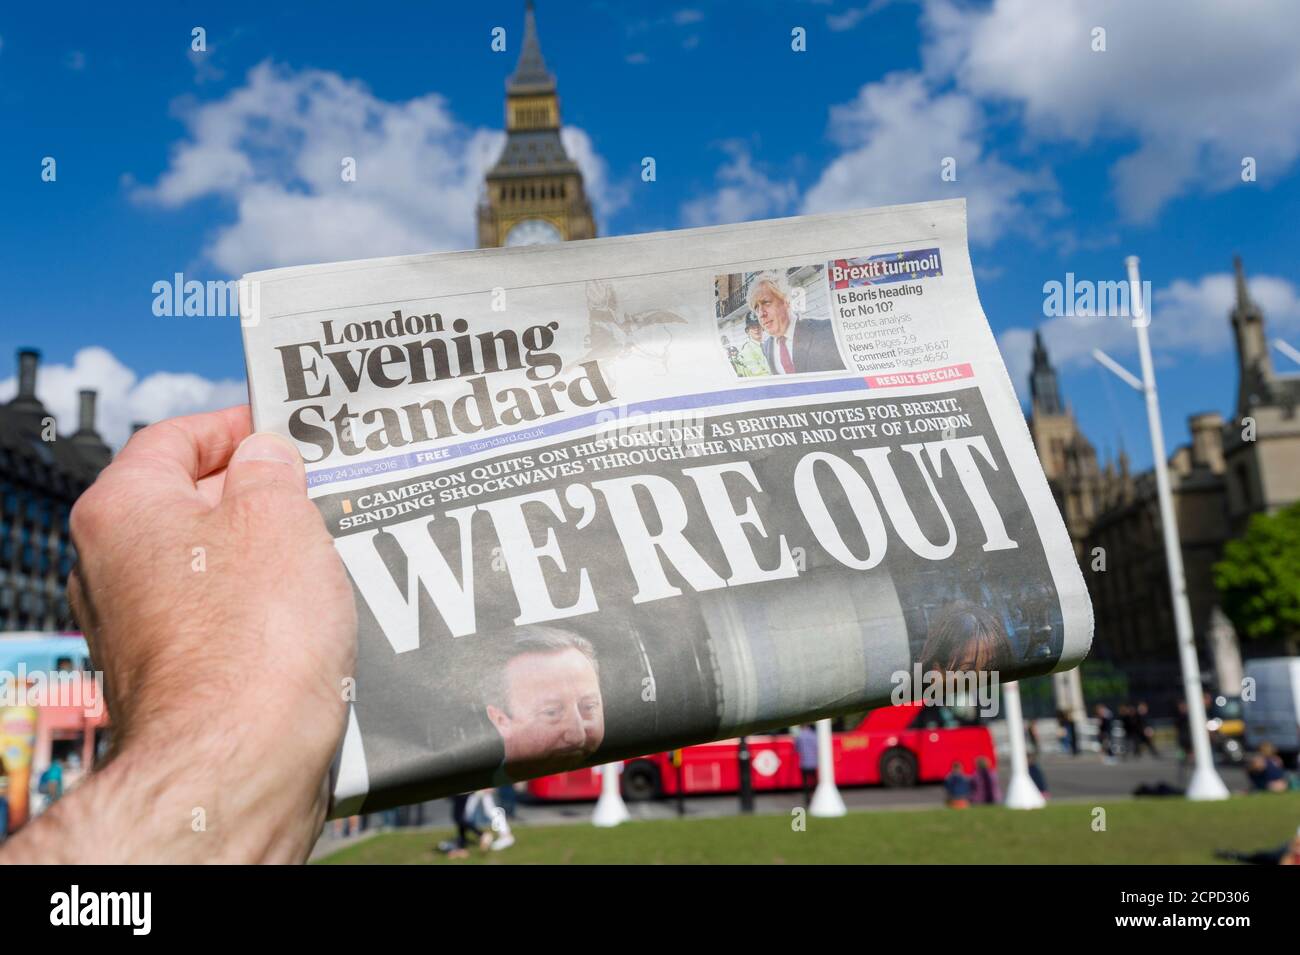 A London Evening Standard Newspaper, with the headline ‘We’re Out’ after Britain voted to leave the European Union, in yesterdays referendum, being held up in front of Houses of Parliament, Parliament Square, Westminster, London, UK.  24 Jun 2016 Stock Photo